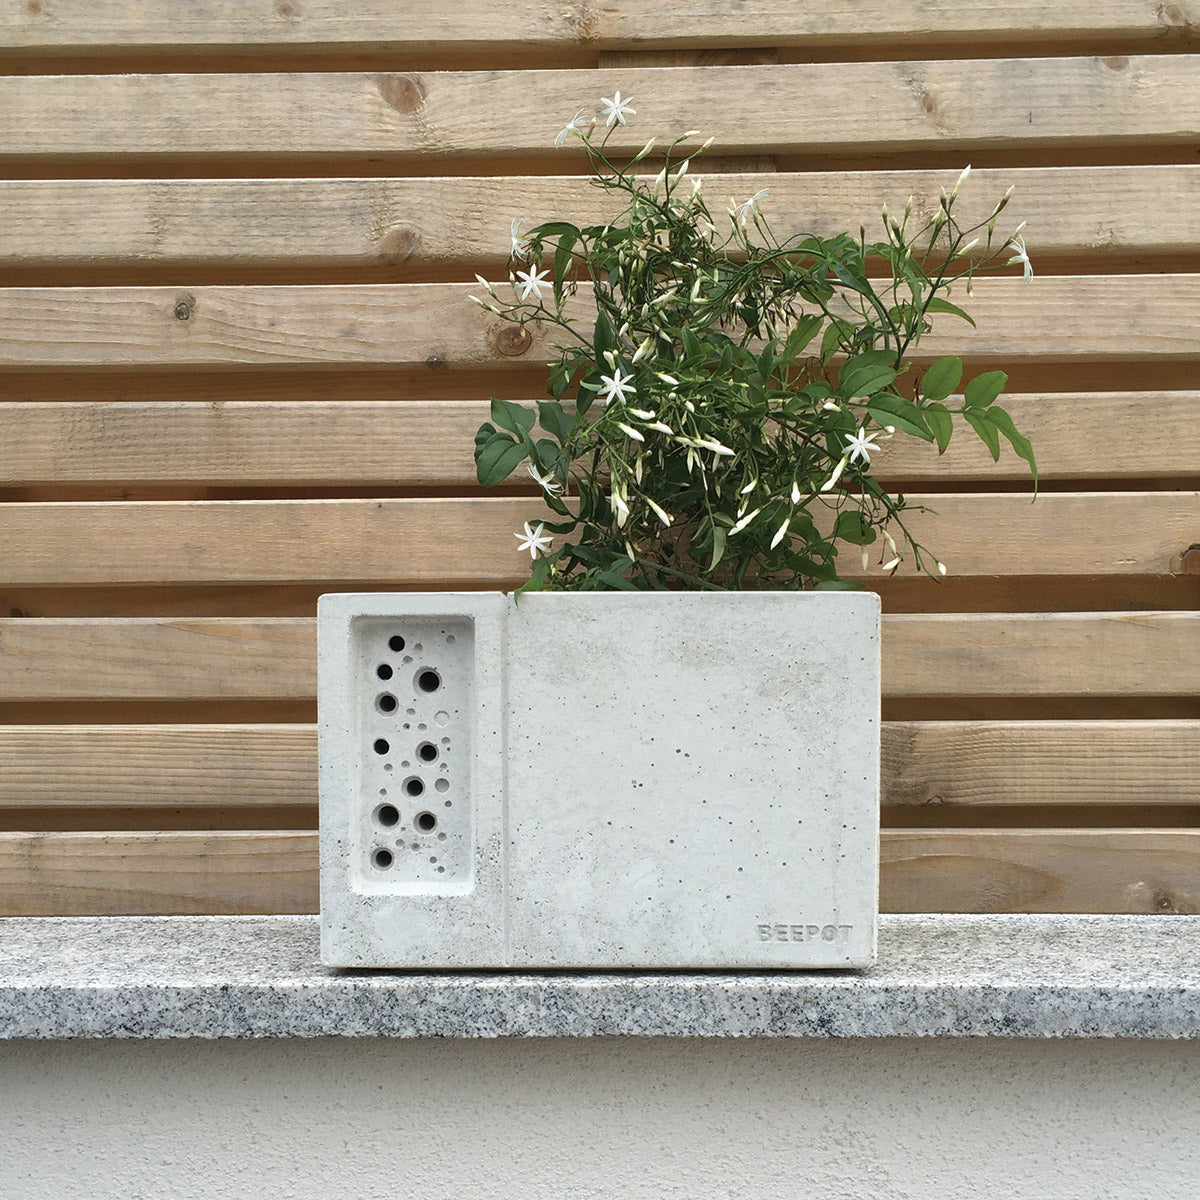 Beepot bee hotel and concrete planter